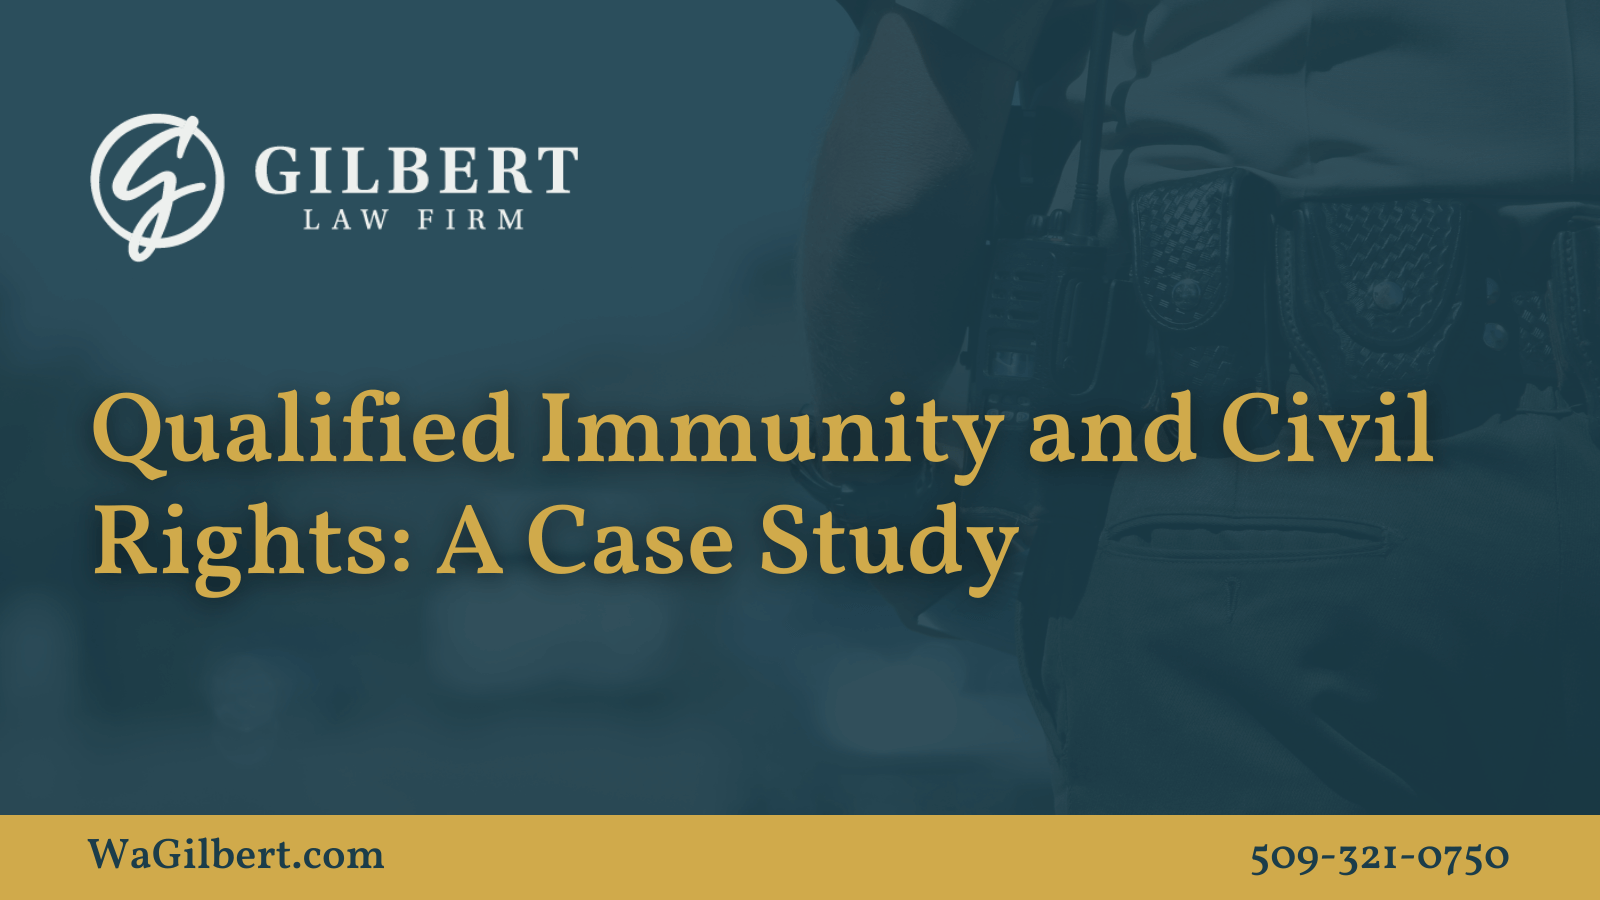 Qualified Immunity and Civil Rights, A Case Study - Gilbert Law Firm Spokane Washington